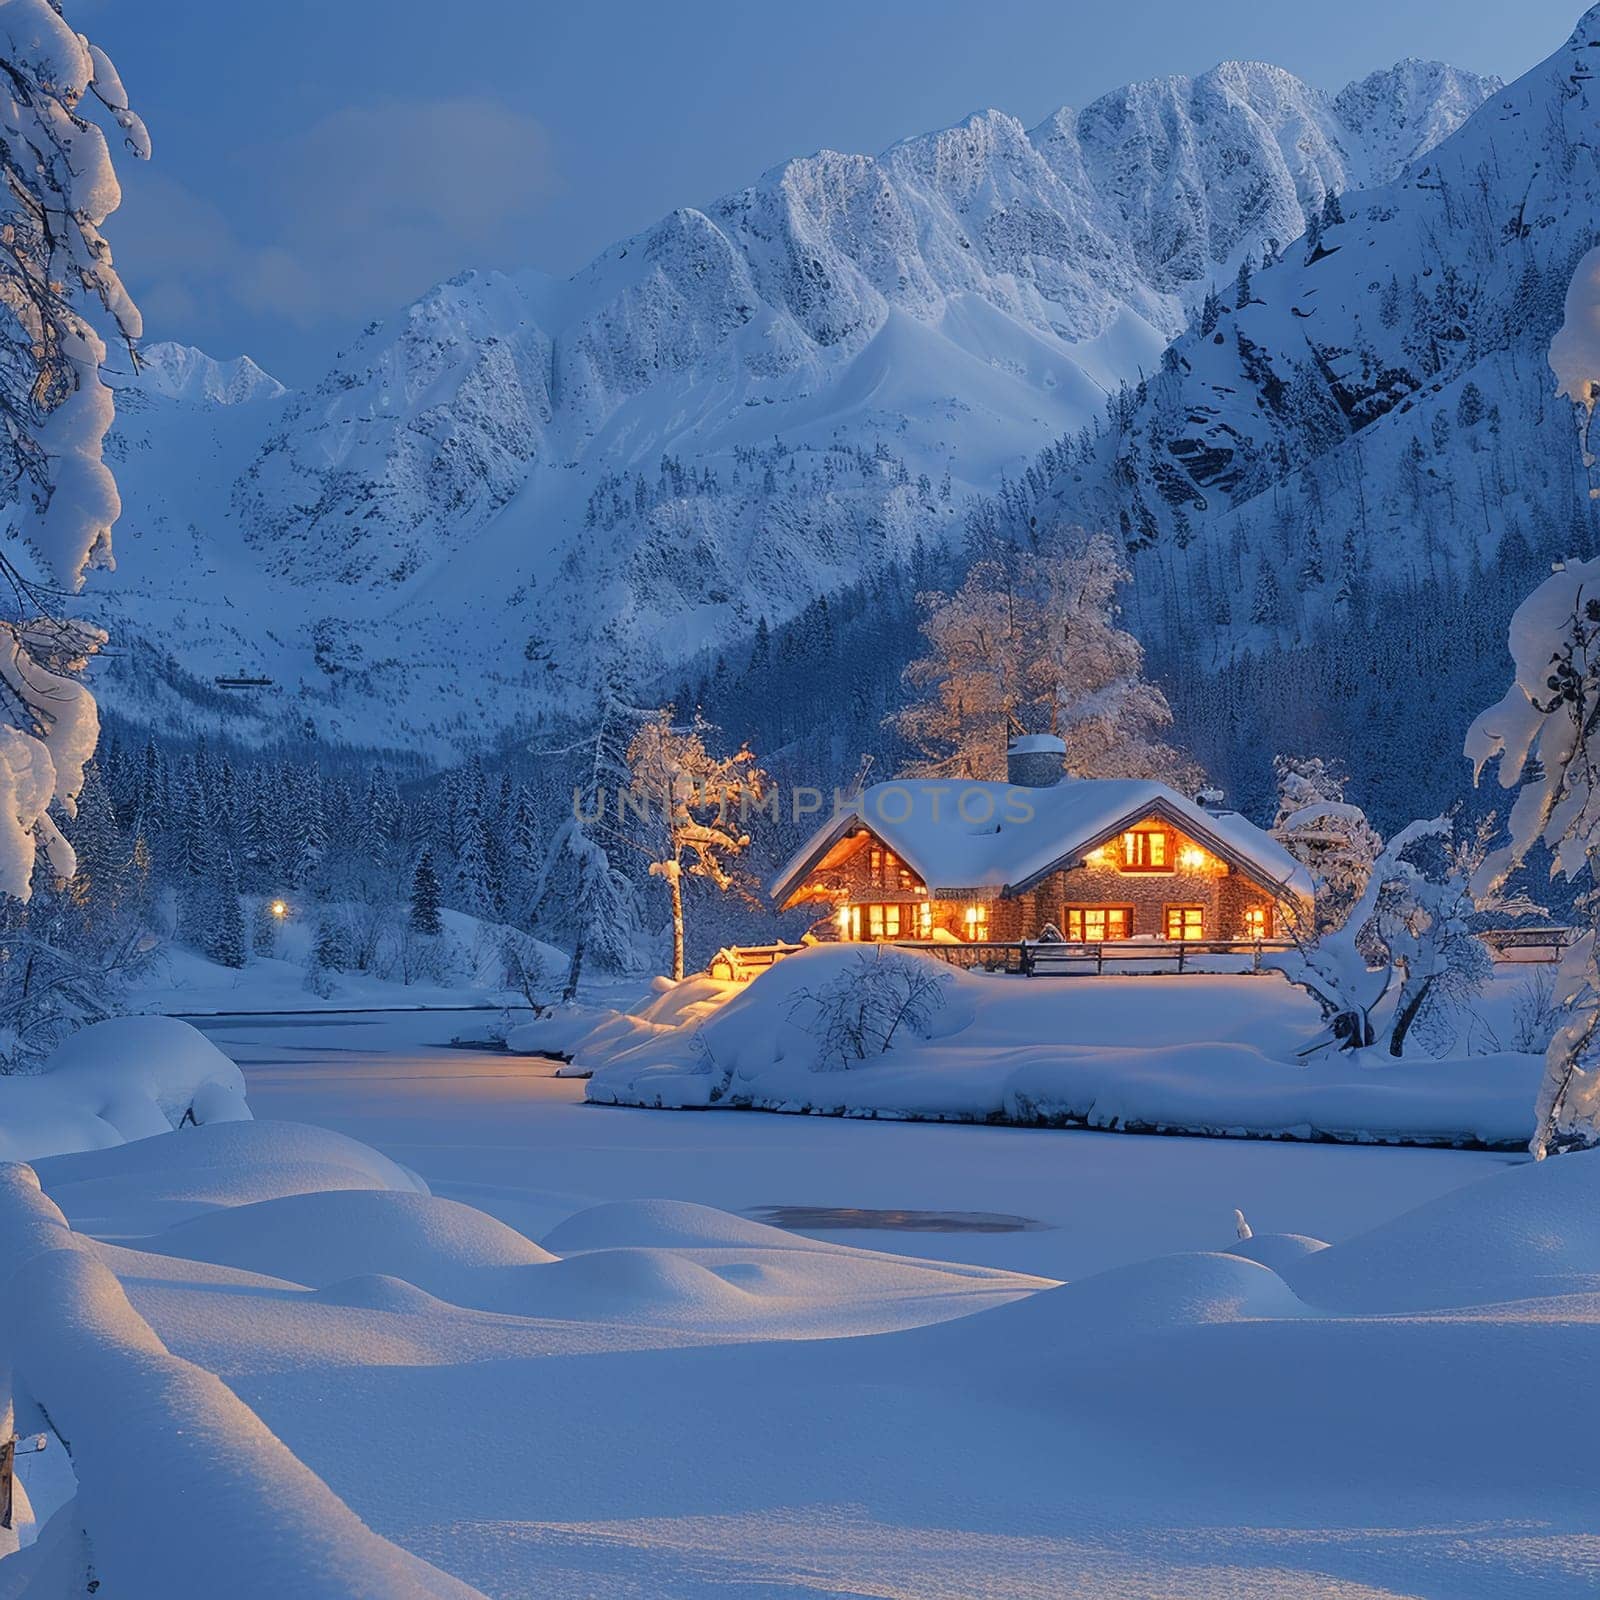 A cozy cabin in a snow-covered landscape, lit warmly from within, symbolizing refuge and warmth.